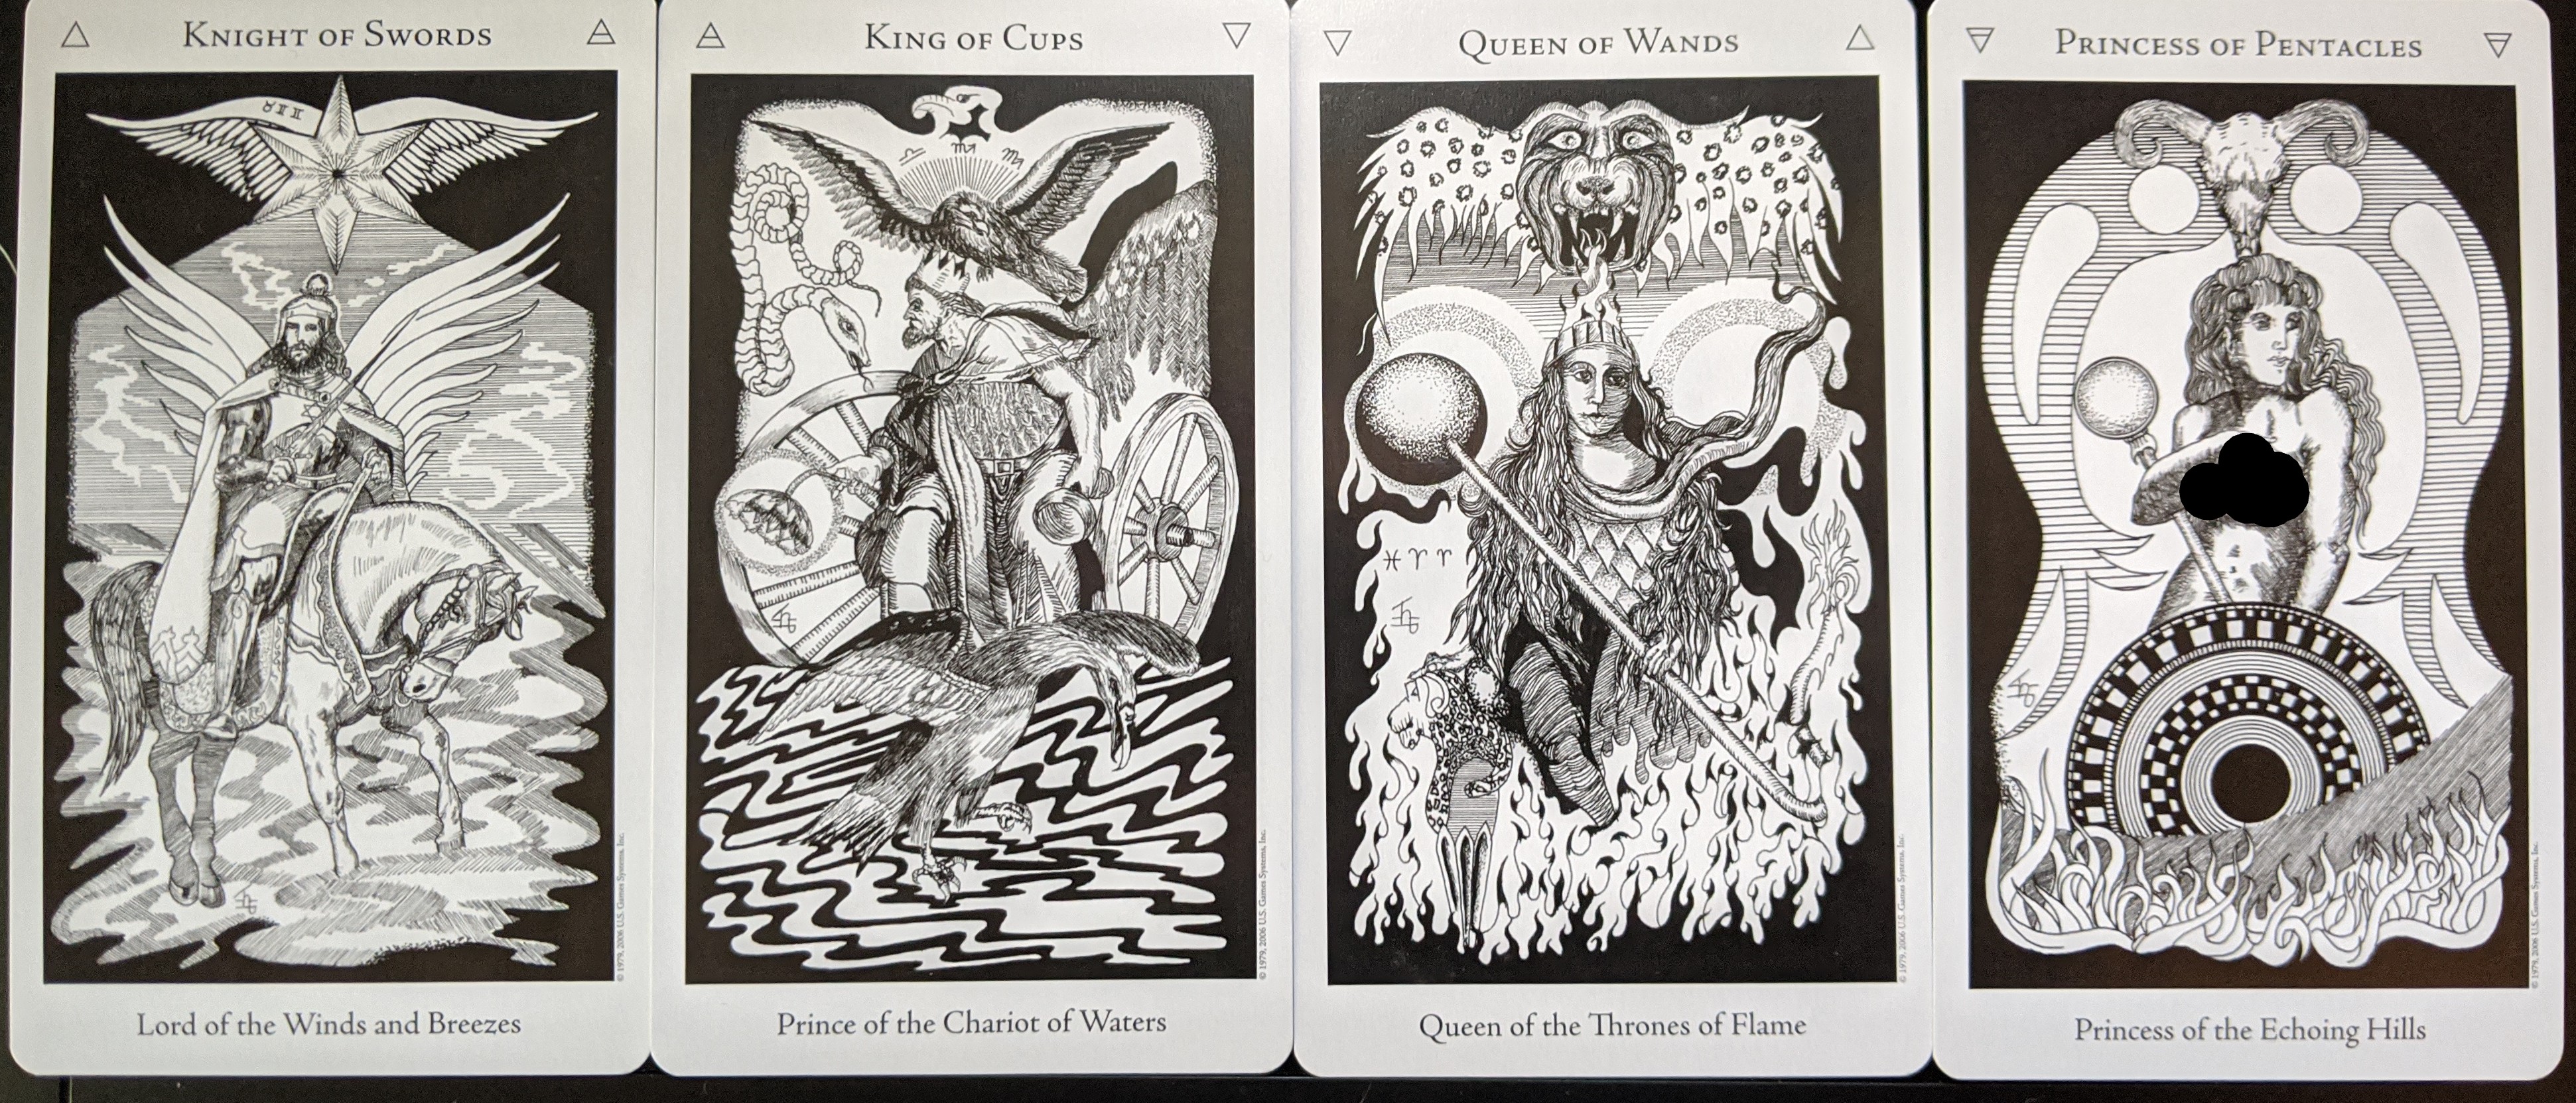 [Pictured: The Knight of Swords, the King of Cups, the Queen of Wands, and the Princess of Pentacles from the Hermetic Tarot.]